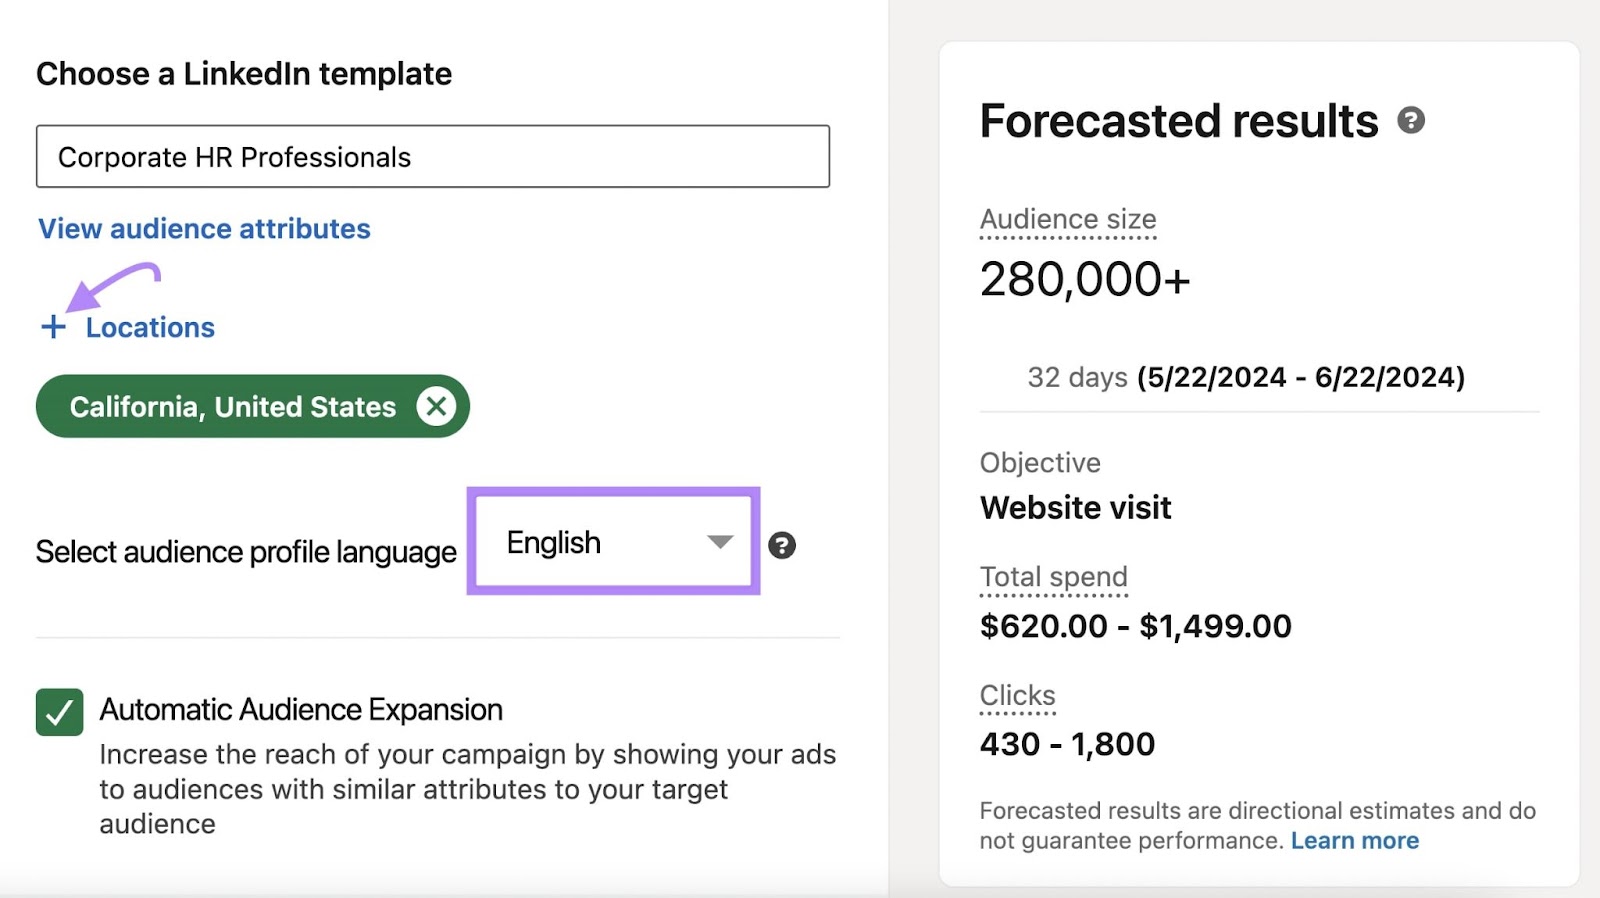 LinkedIn ads template with California selected and English language highlighted alongside forecasted results